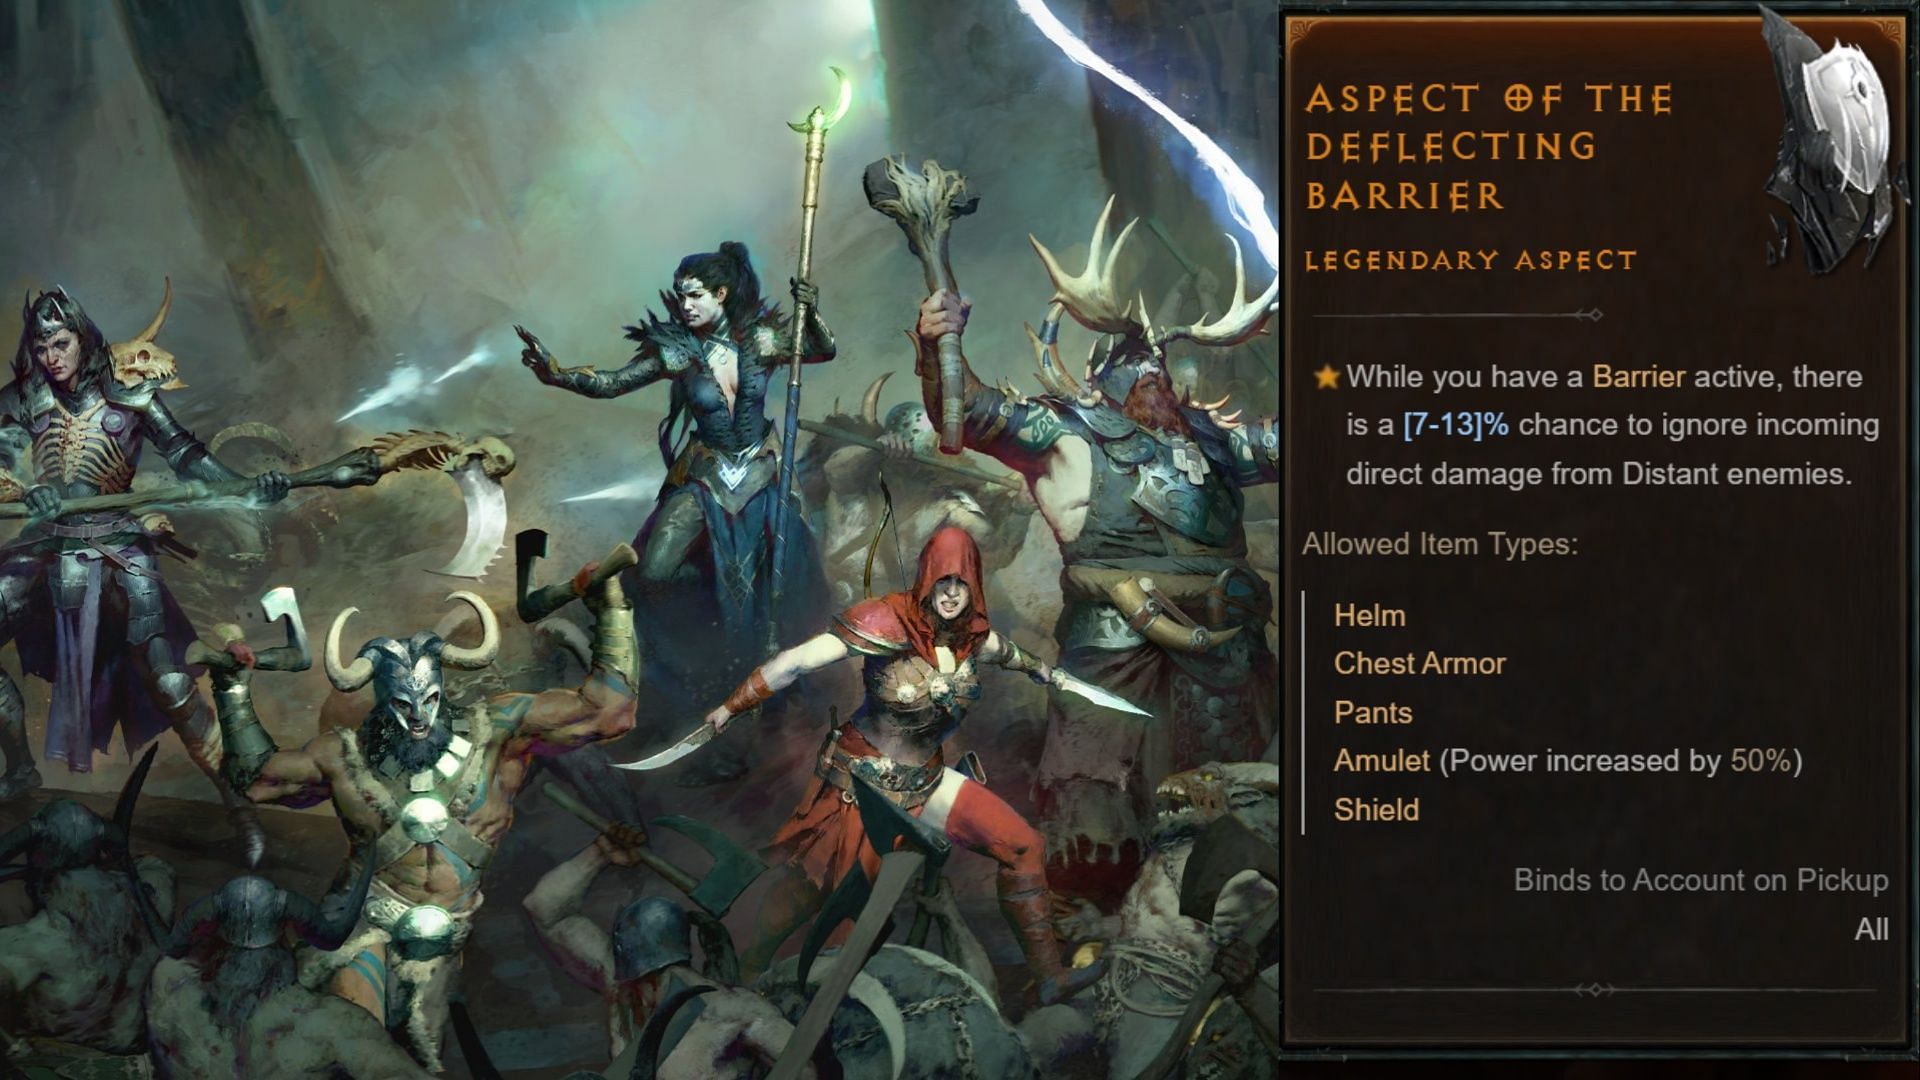 All Diablo 4 classes engaged in battle on the left and Aspect of the Deflecting Barrier description on the right.